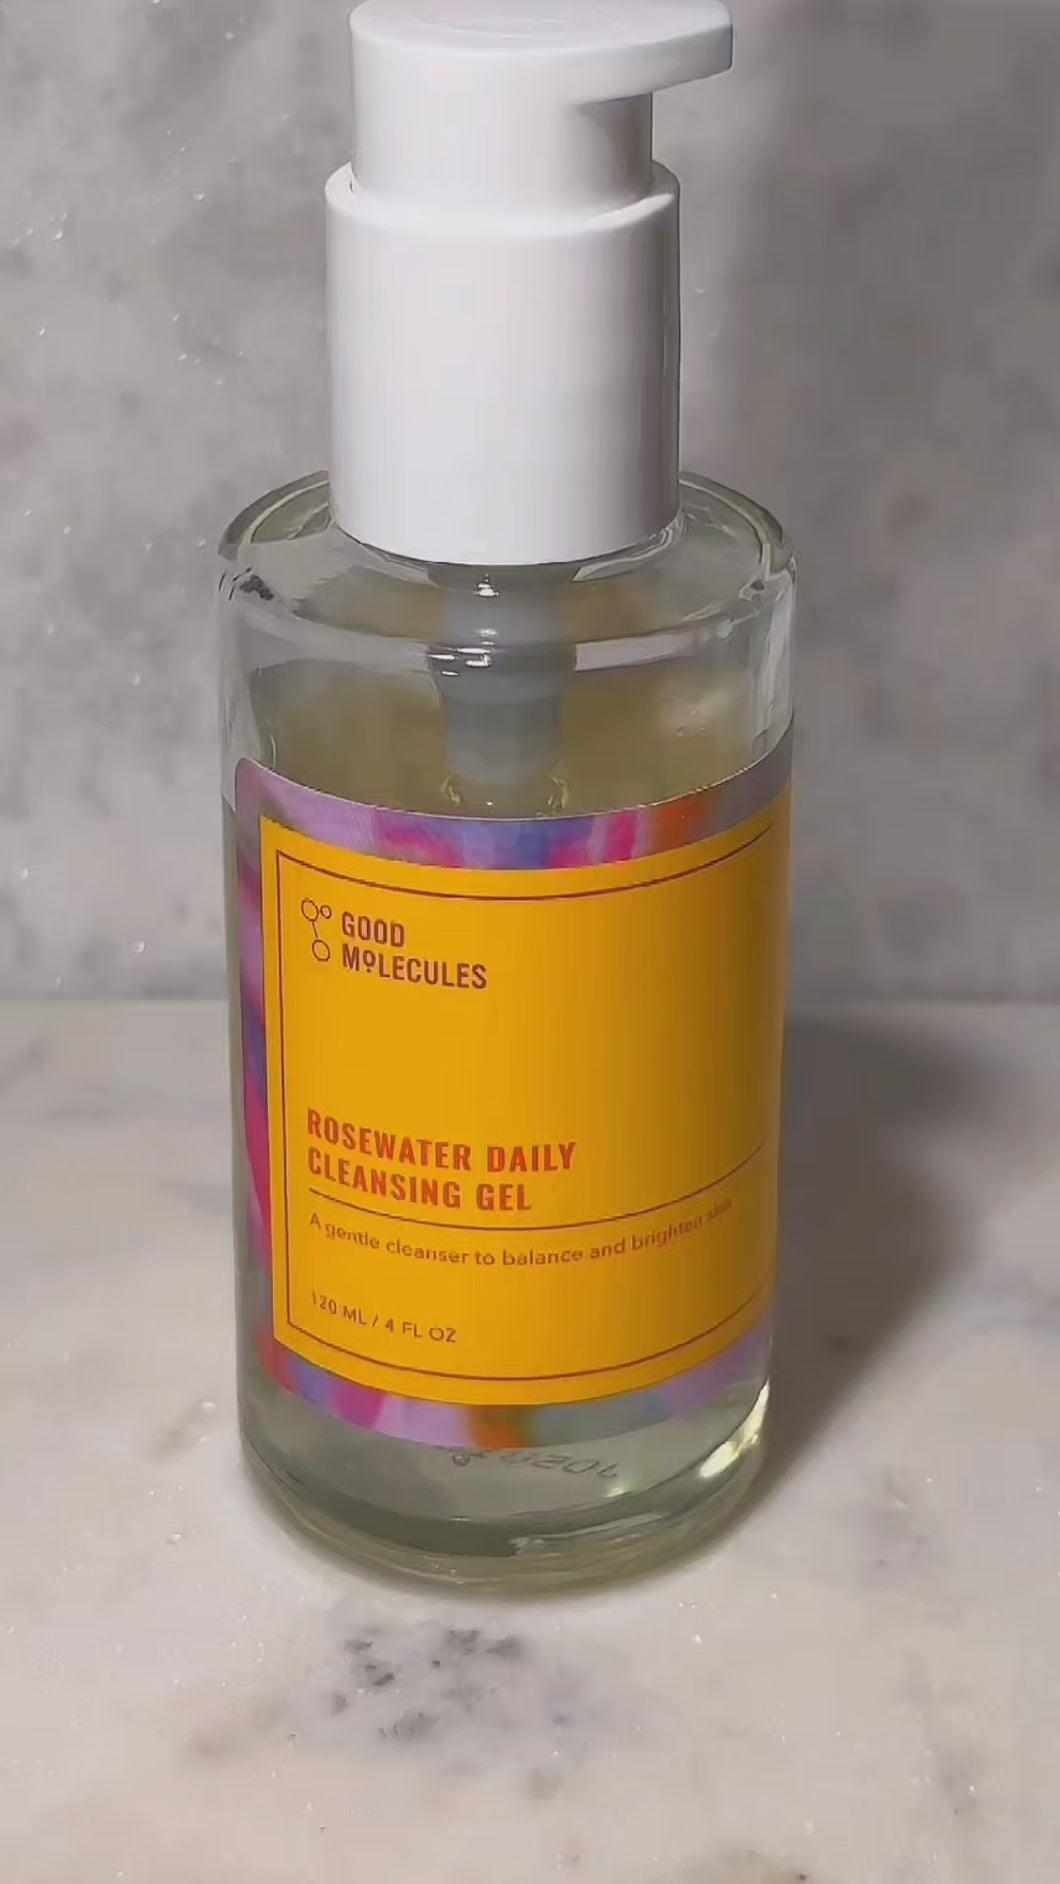 Good molecules Rosewater cleanser